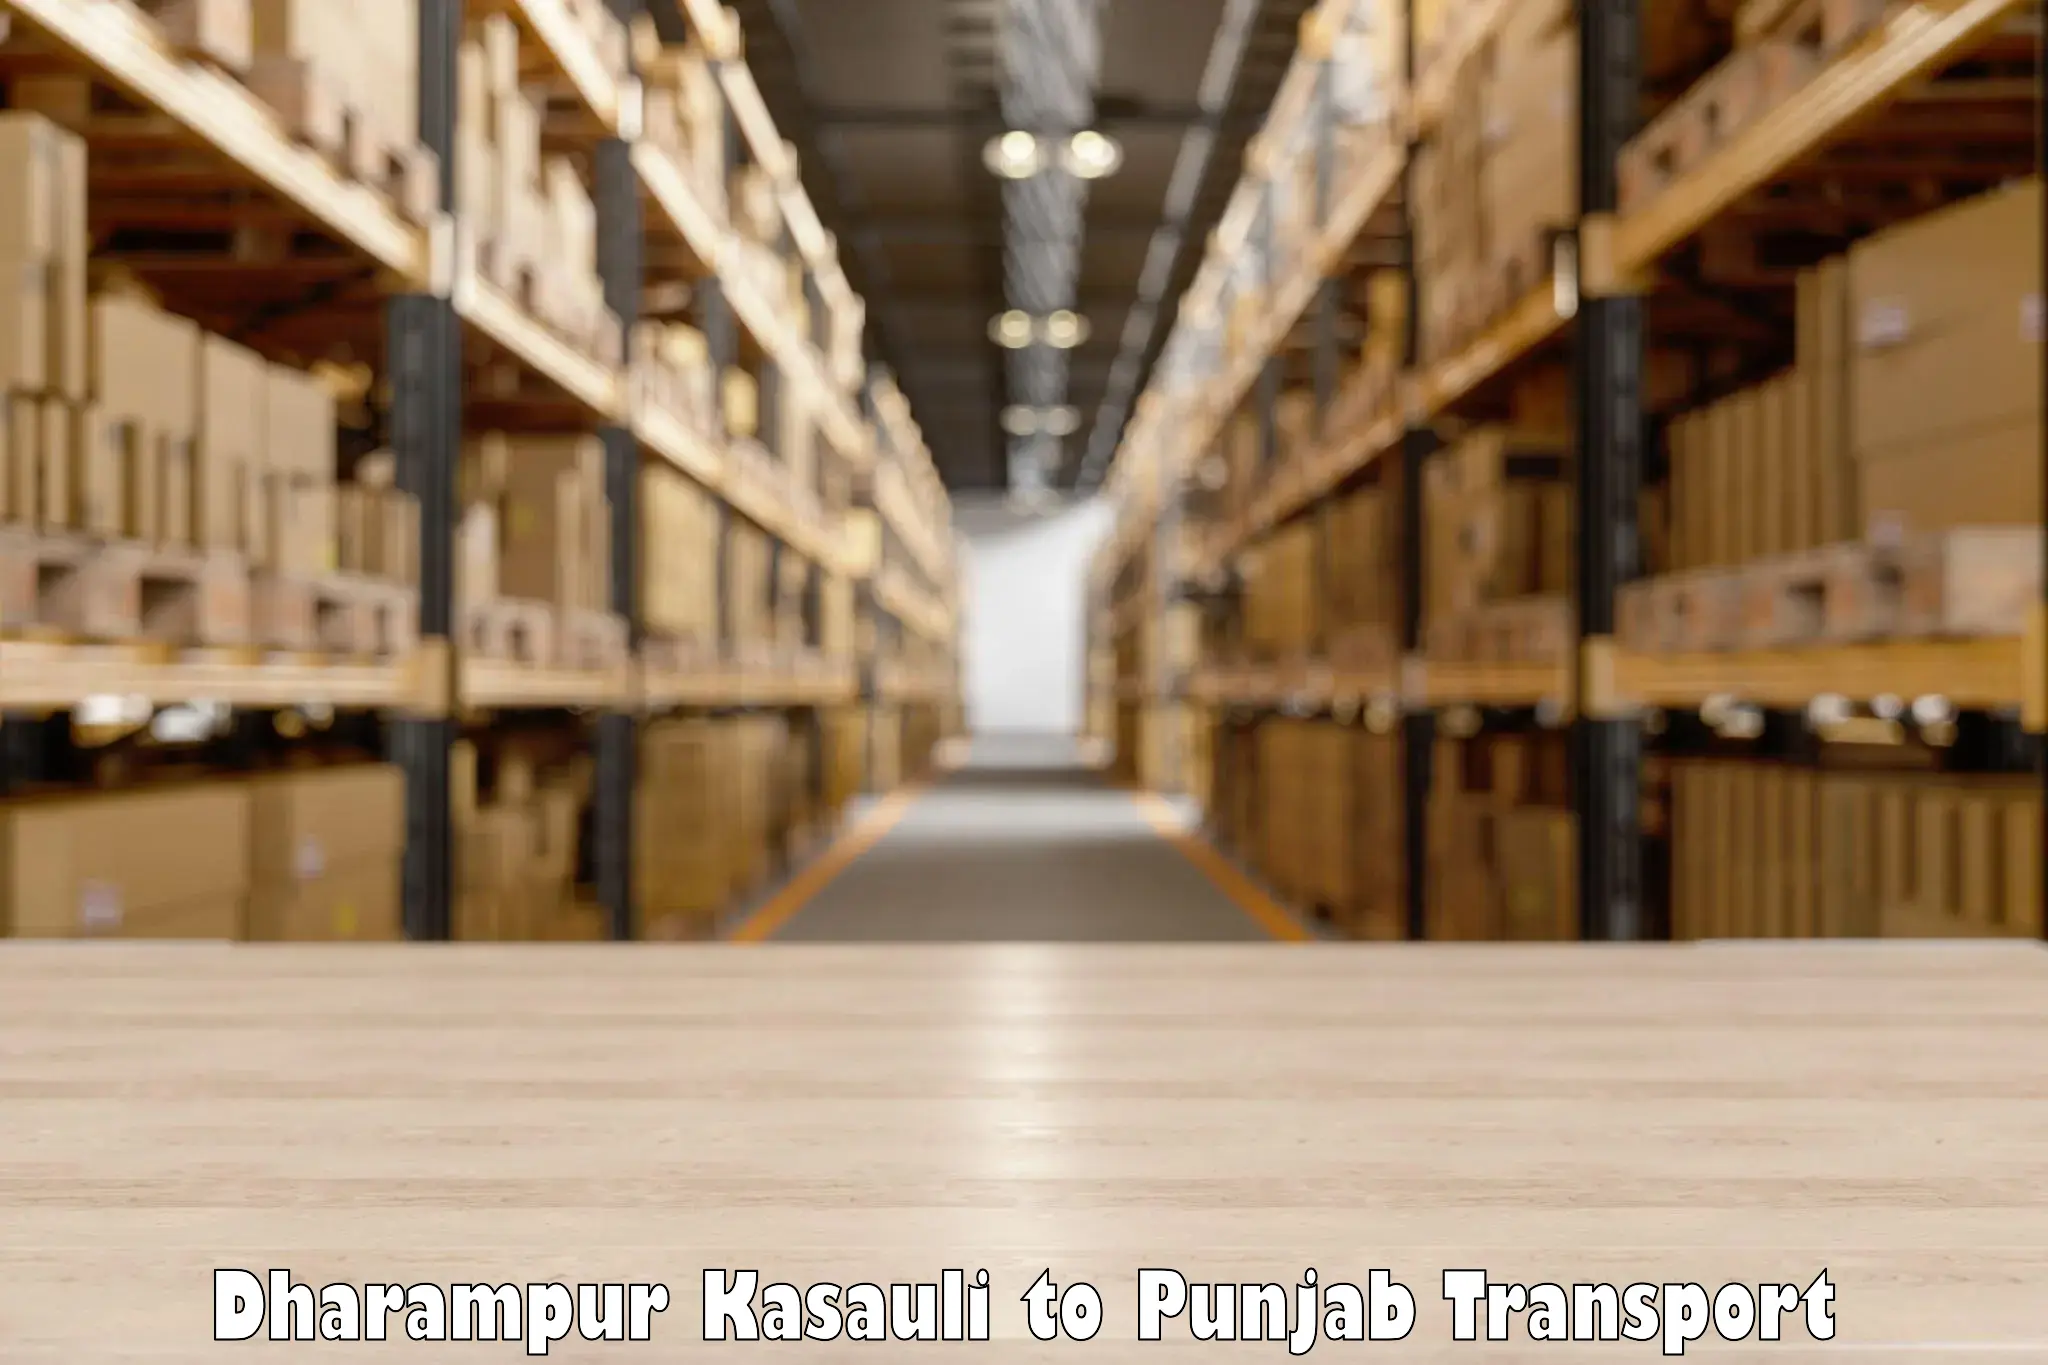 Air freight transport services in Dharampur Kasauli to Sangrur